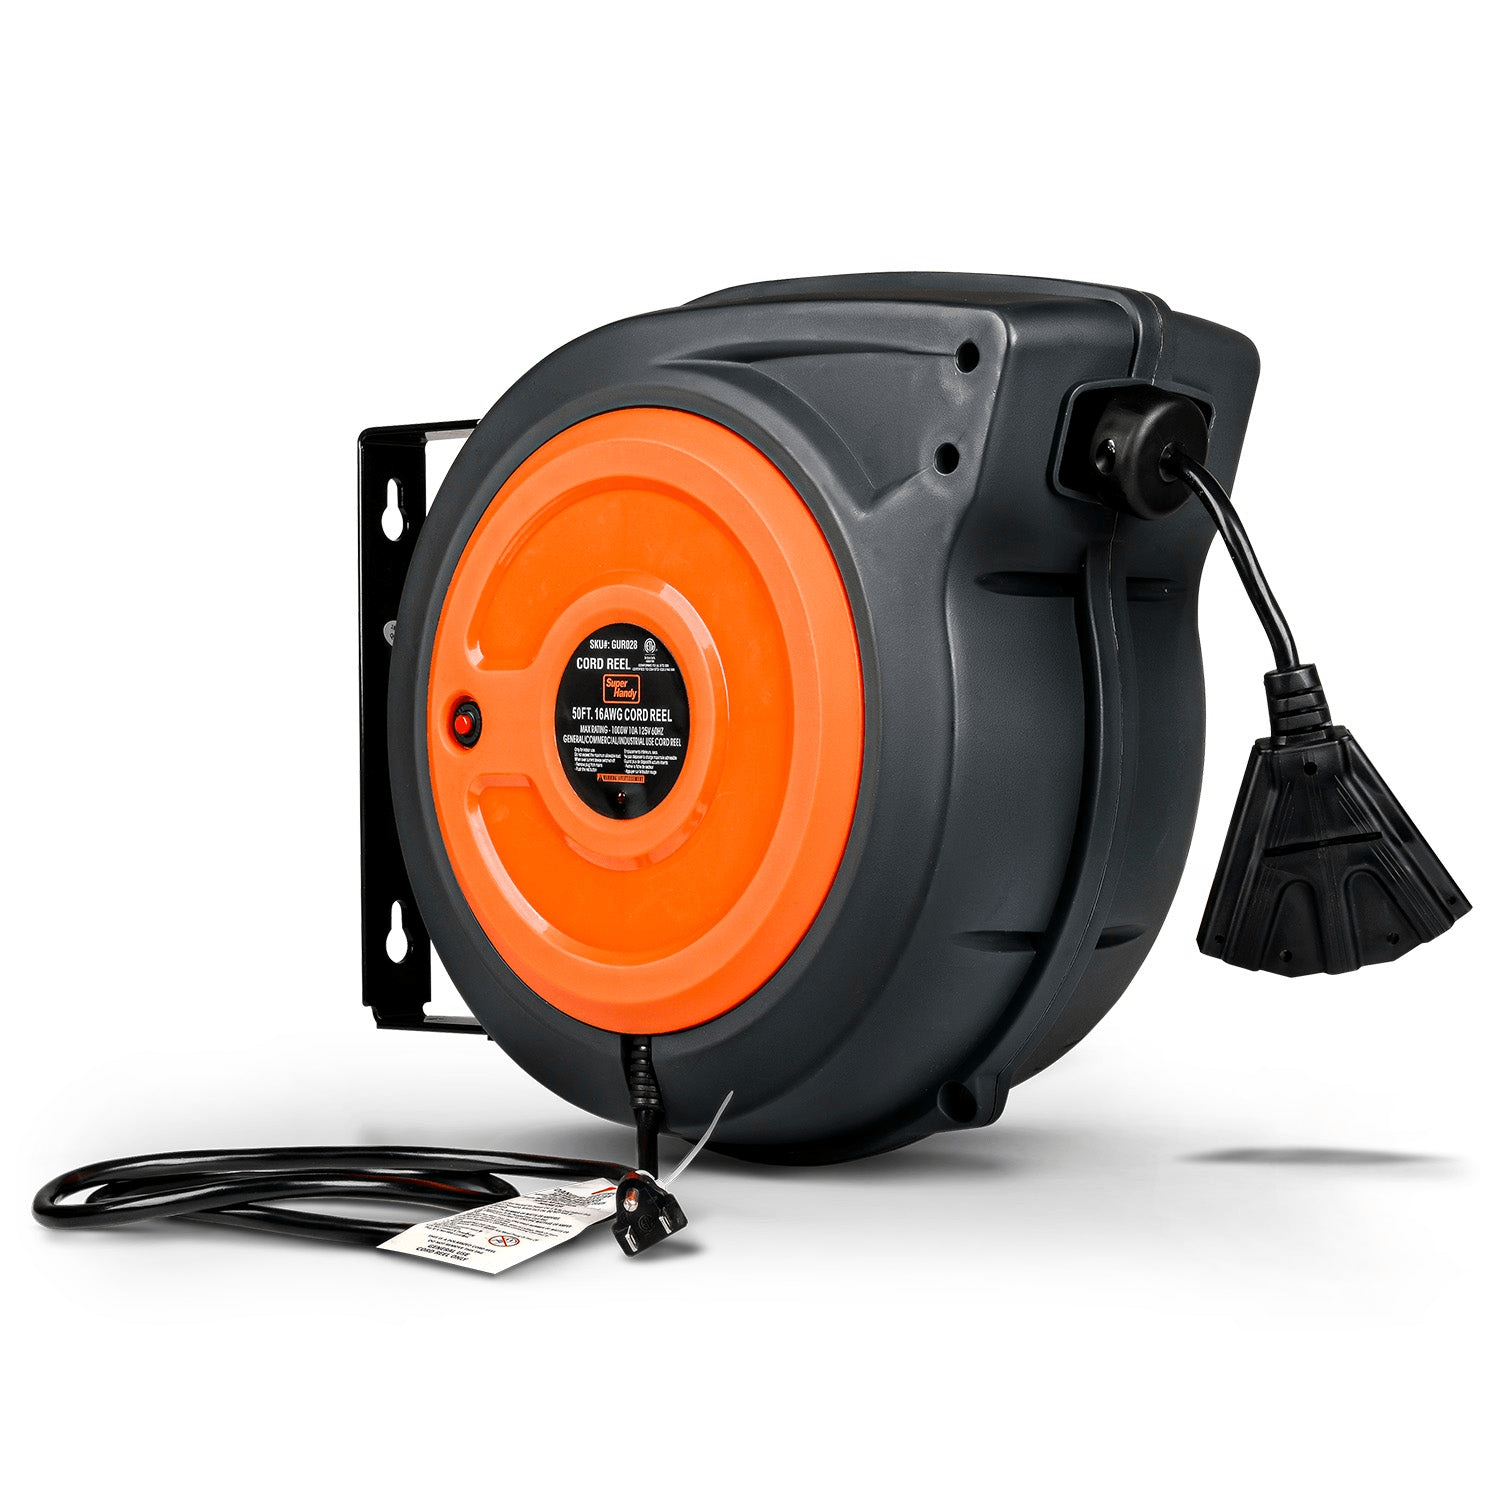 SuperHandy Enclosed Extension Cord Reel - 16AWG, 50' Ft Cord Length